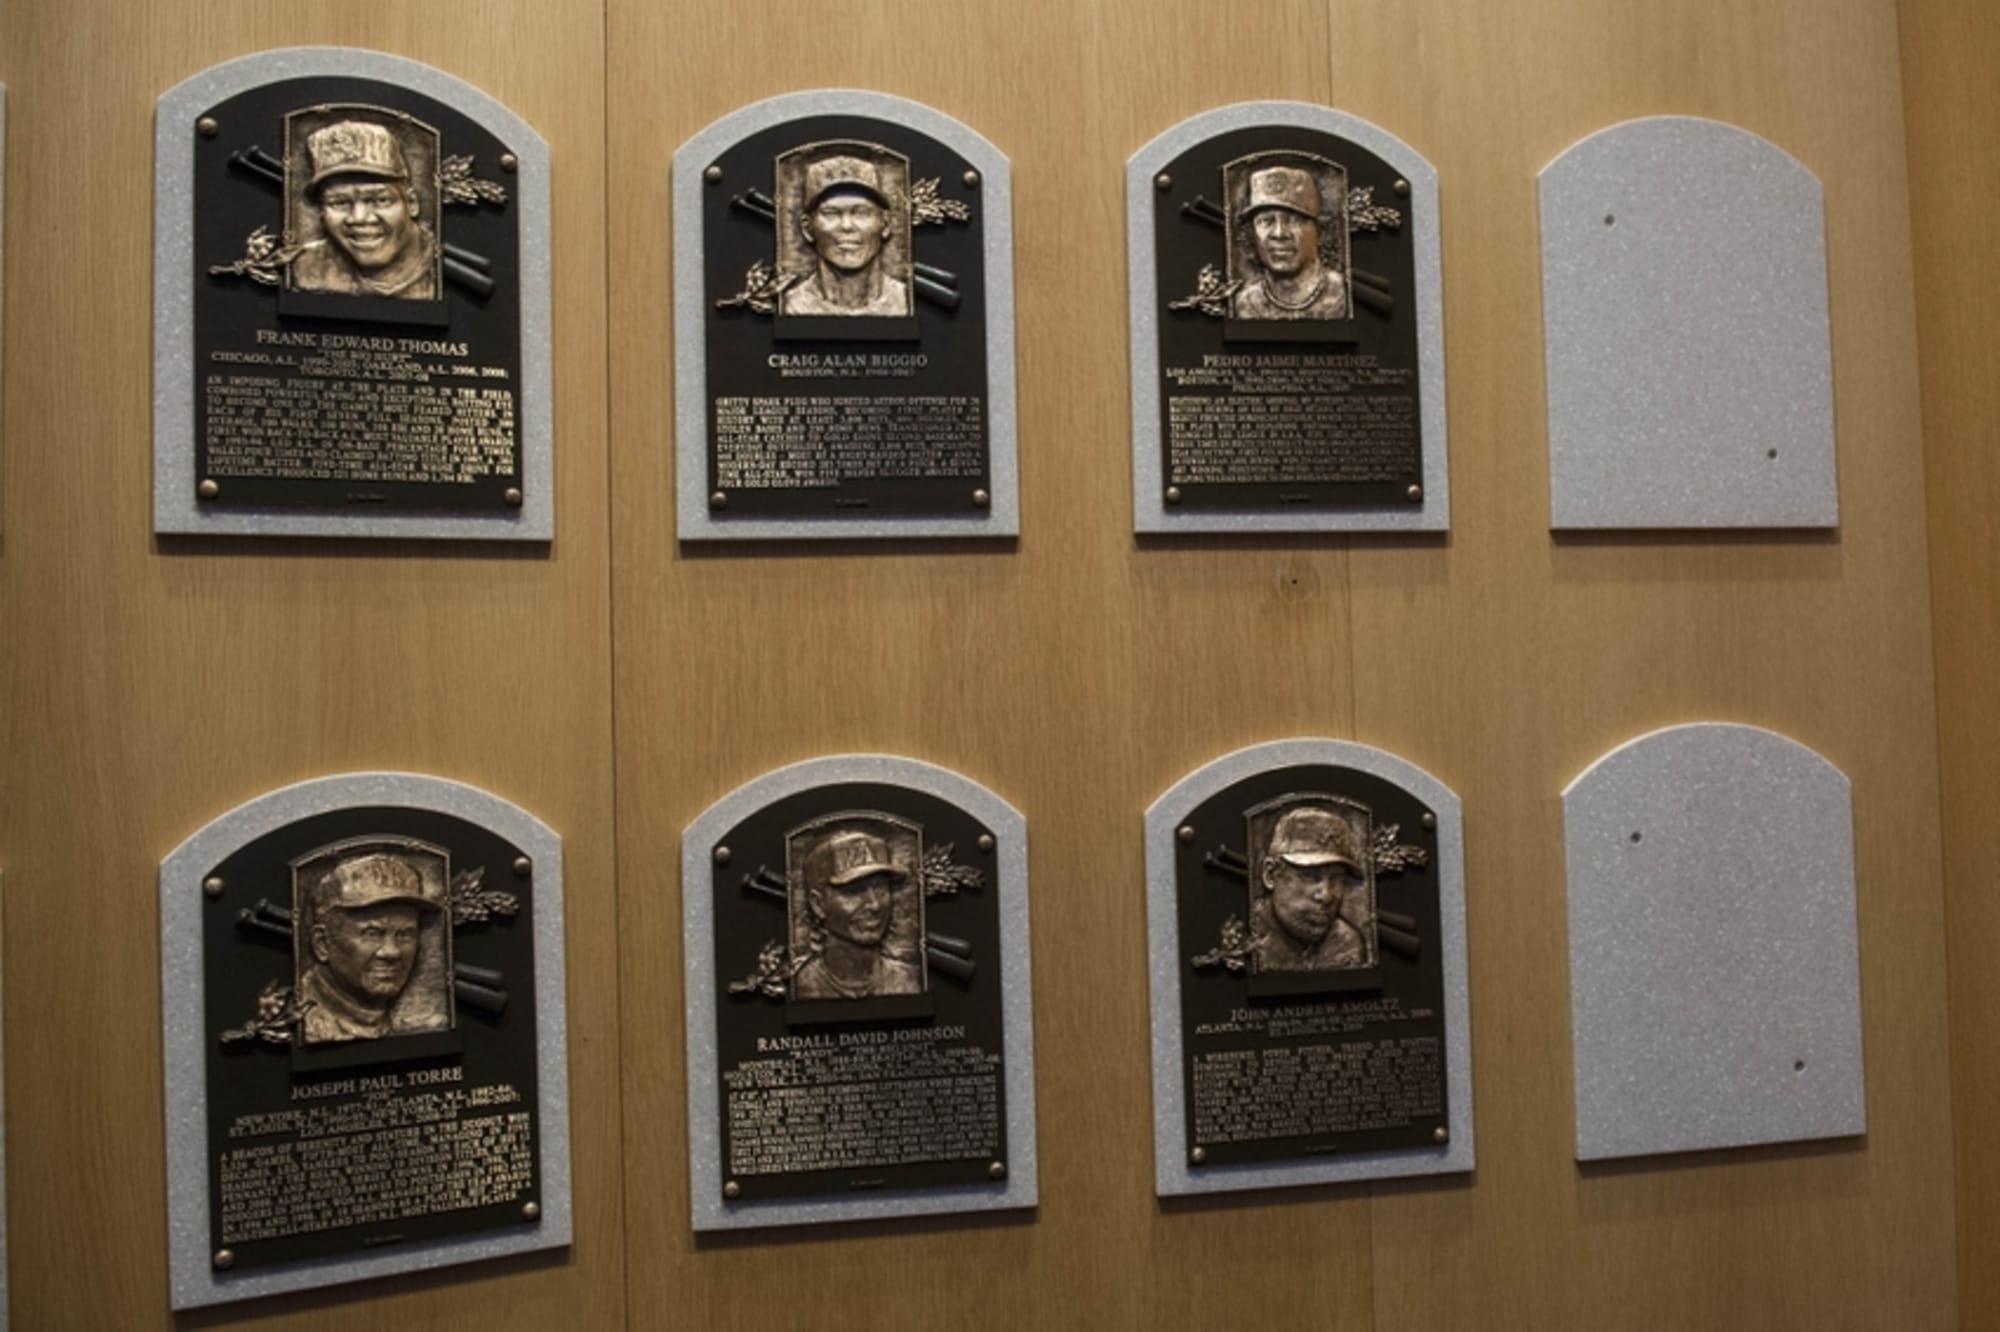 When a Hall of Fame bronze bust is perceived as a 'bust